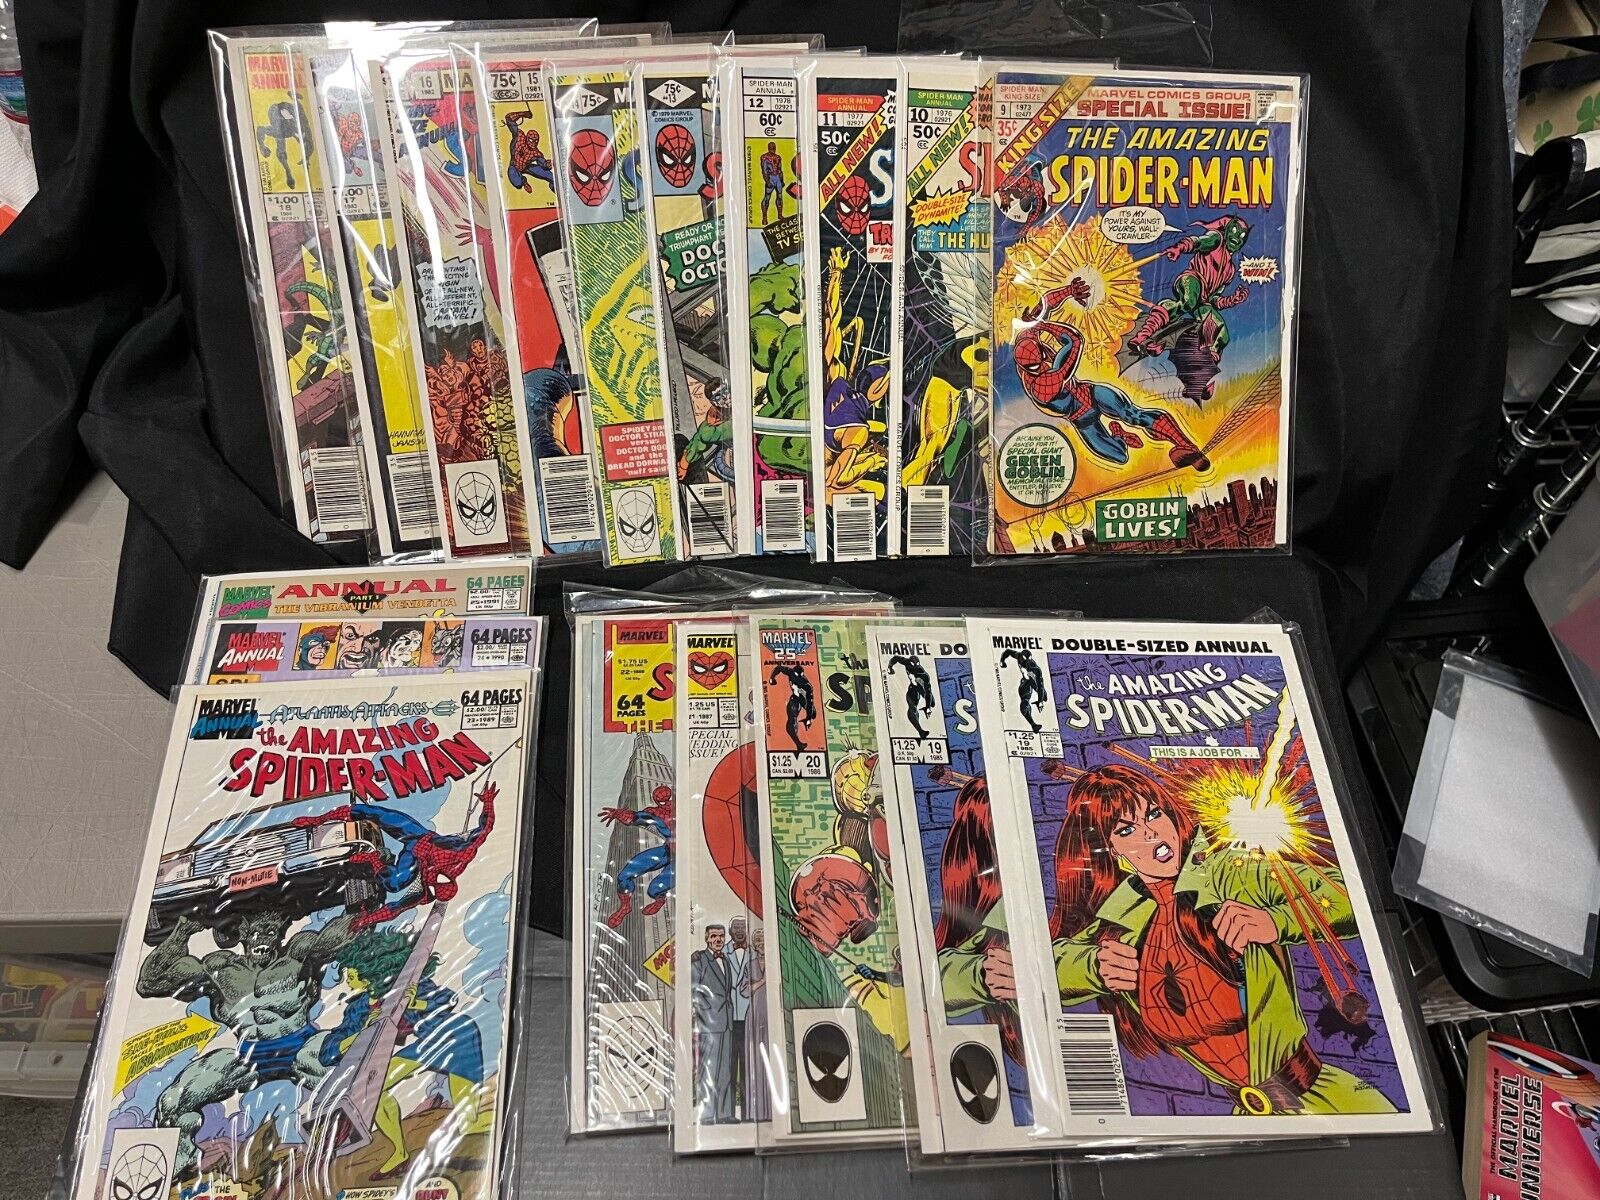 AMAZING SPIDER-MAN ANNUALS #9 TO #25 COMPLETE HIGH GRADE RUN WOW MAKE OFFER